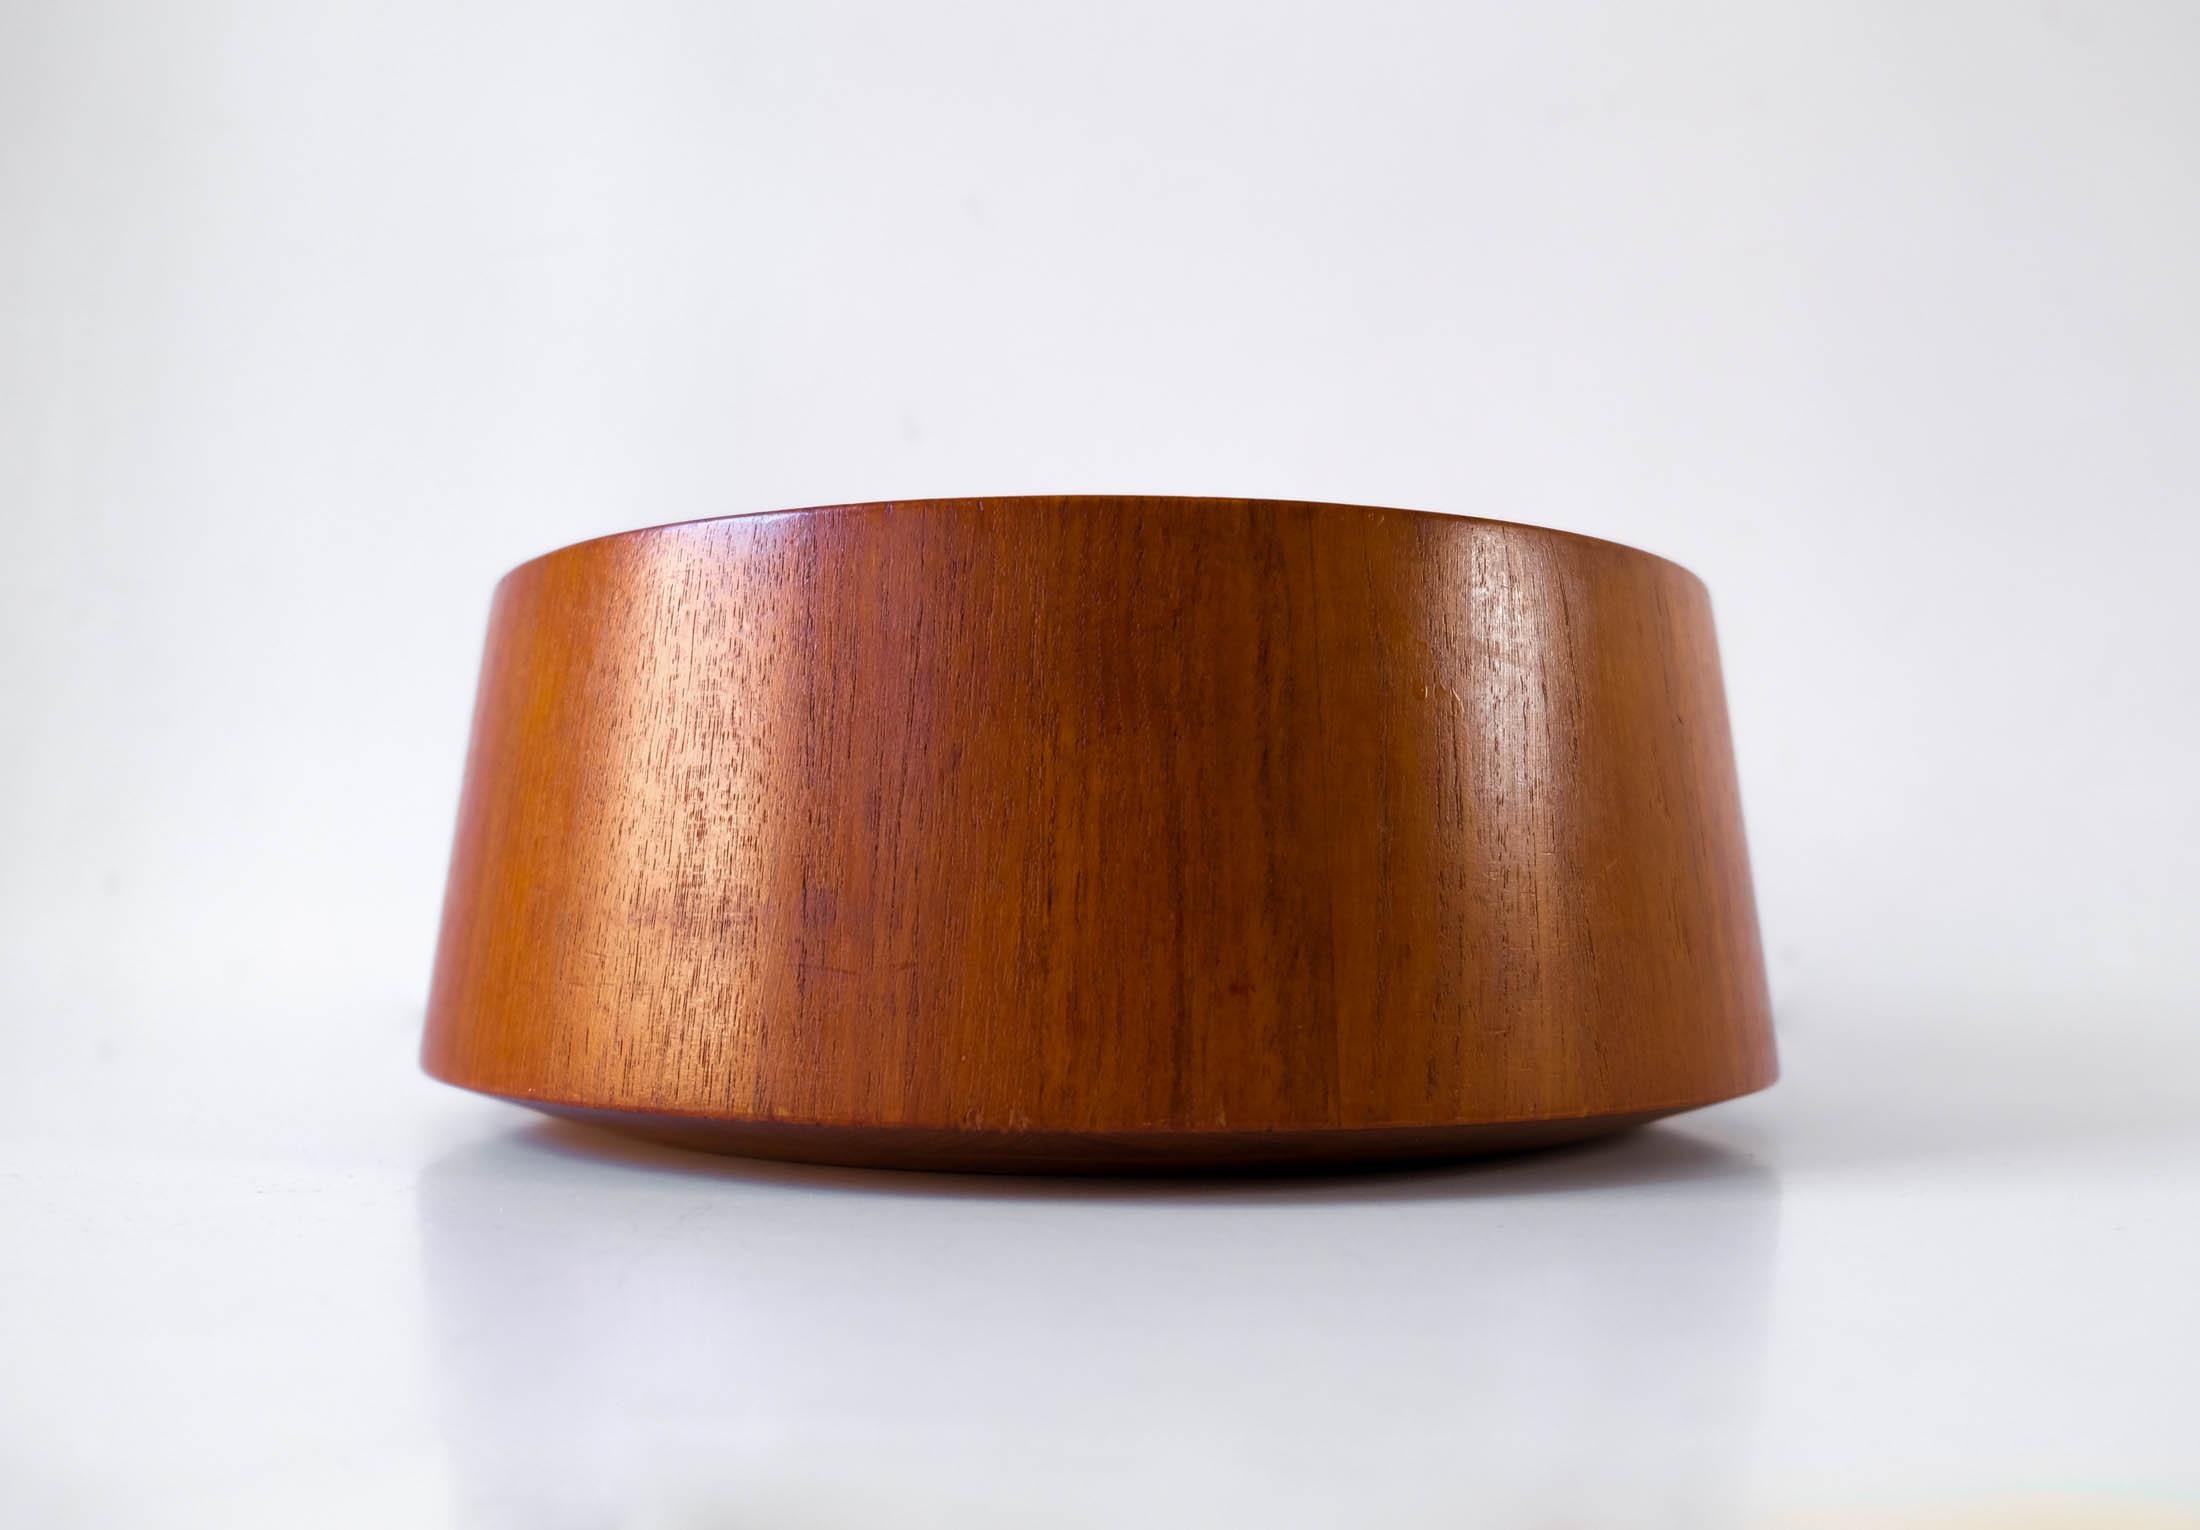 For sale a stunning Danish Mid-Century Modernist teak salad/fruit bowl designed by Jens H. Quistgaard for Dansk Designs, circa 1960s.

This beautifully elegant bowl, with its staved solid teak construction, carries all the hallmarks of Danish